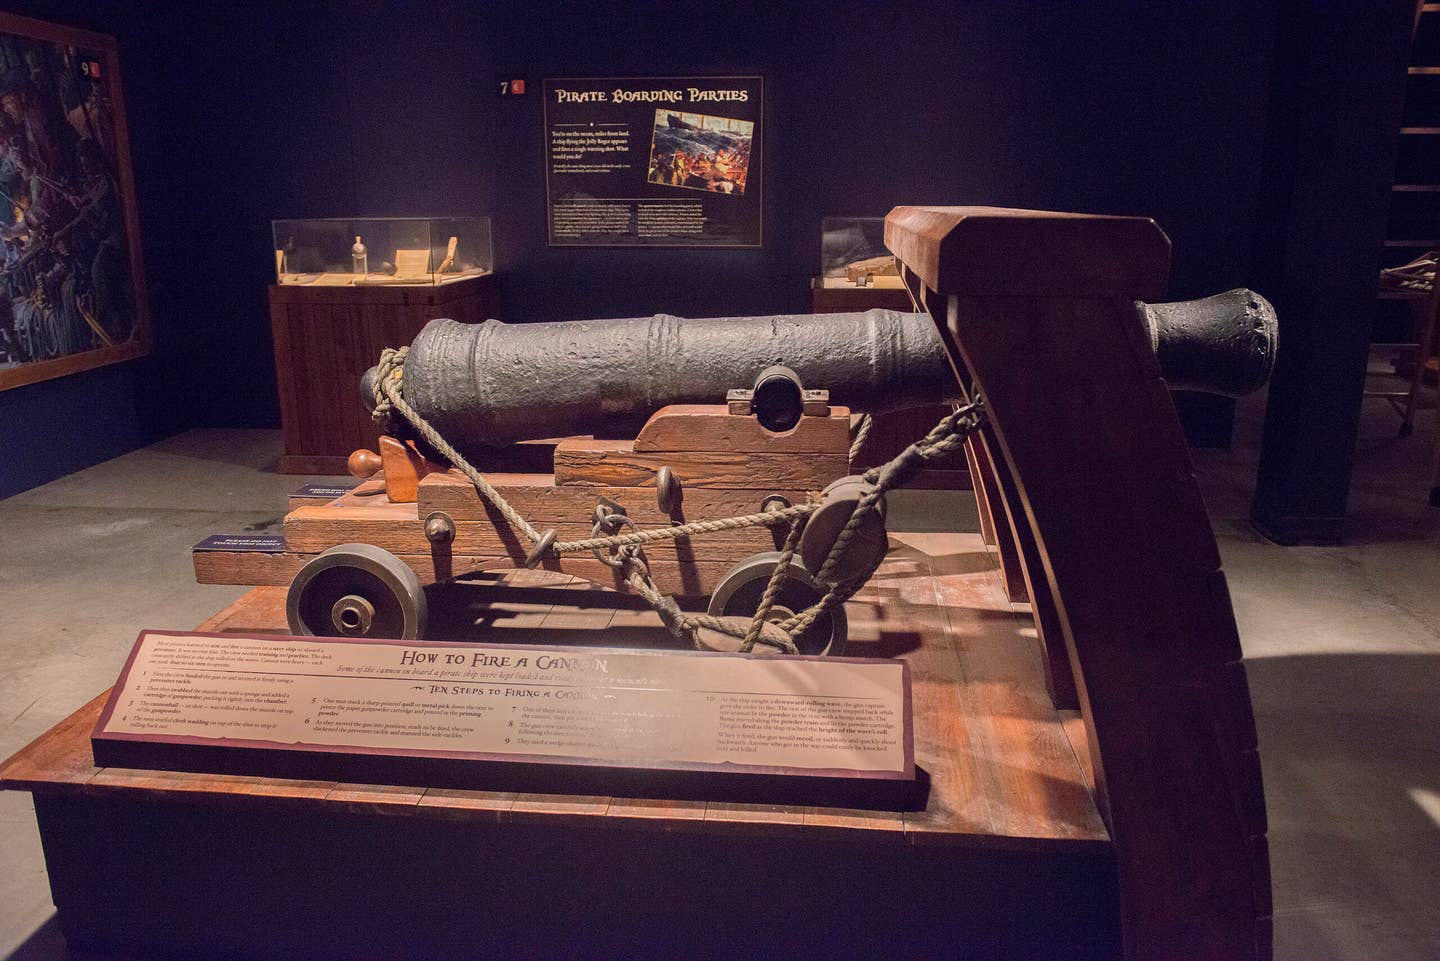 An English three-pound cannon recovered from the deck of the pirate ship <em>Whydah</em>, displayed at the Portland Science Center. The wreck of the pirate ship was discovered off Cape Cod, where it had sunk in a storm in 1717. <em>Photo by John Ewing/Portland Portland Press Herald via Getty Images</em>